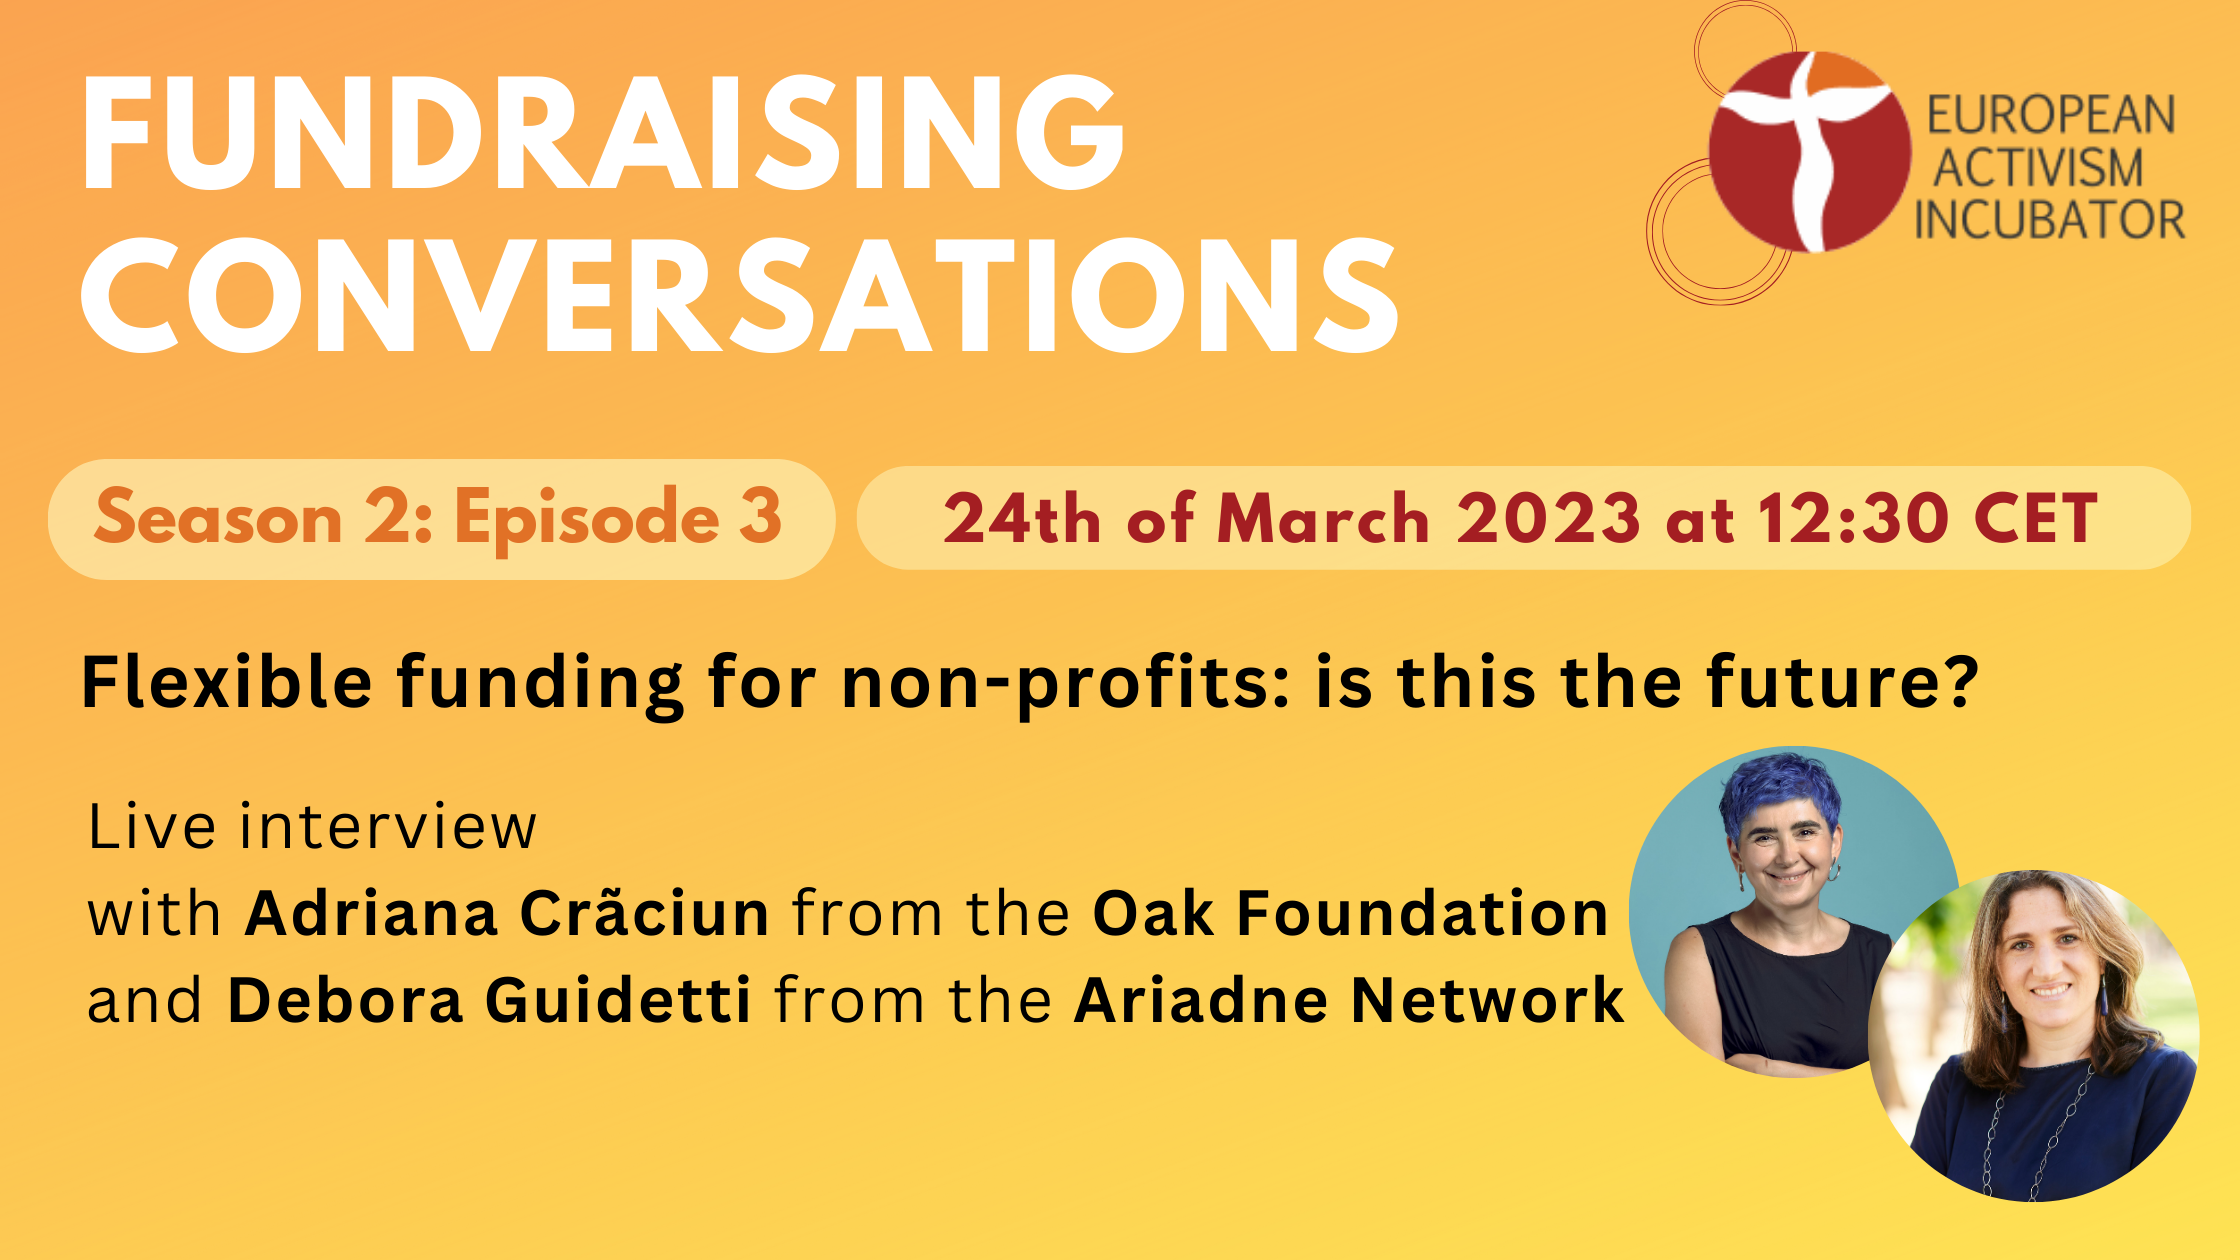 Flexible Funding for Non-Profits: Is this the future? – live interview with Adriana Crãciun from the Oak Foundation and Debora Guidetti from the Ariadne Network.